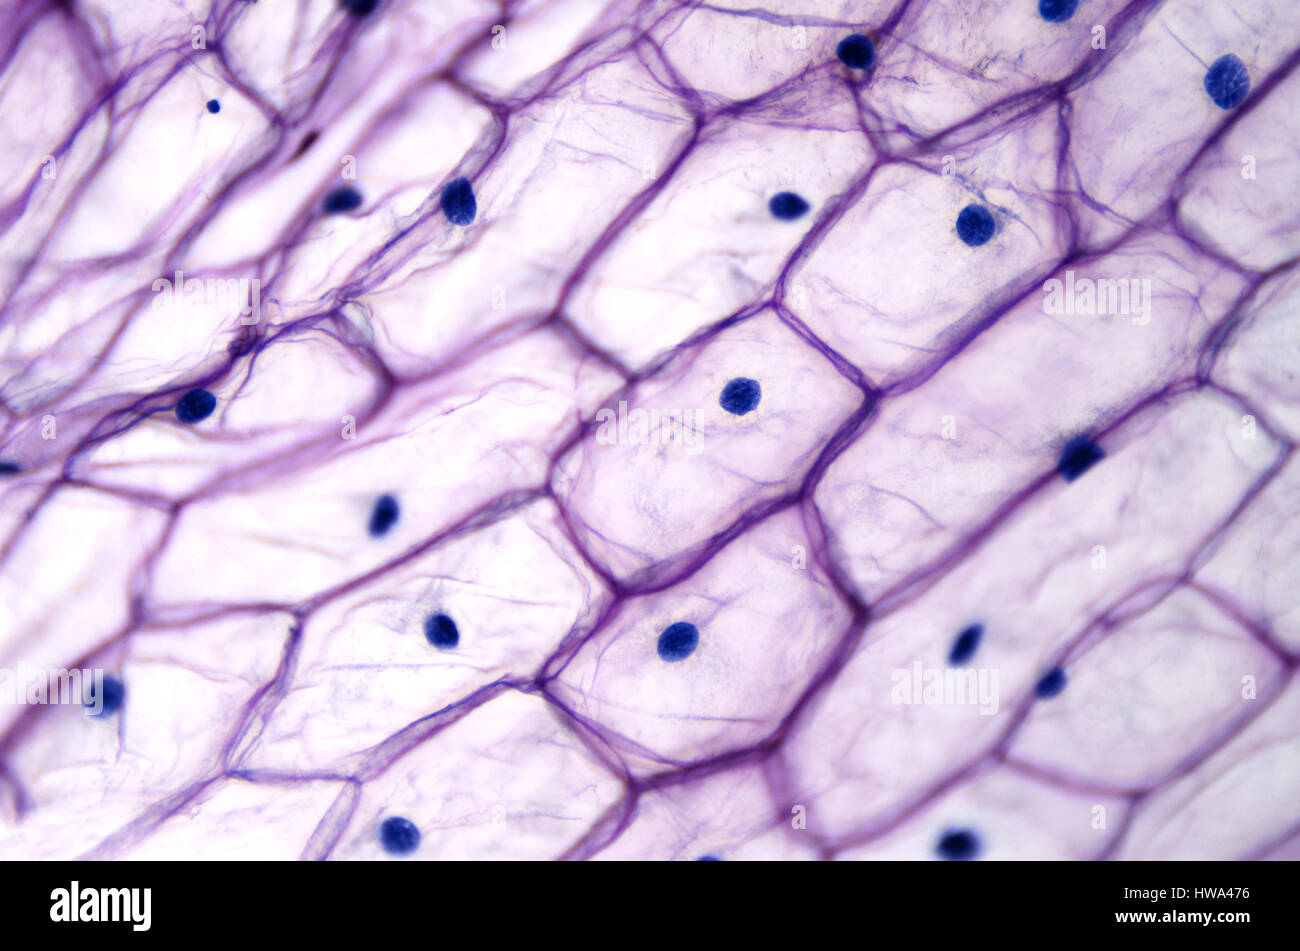 Onion epidermis with large cells under light microscope. Clear epidermal cells of an onion, Allium cepa, in a single layer. Stock Photo